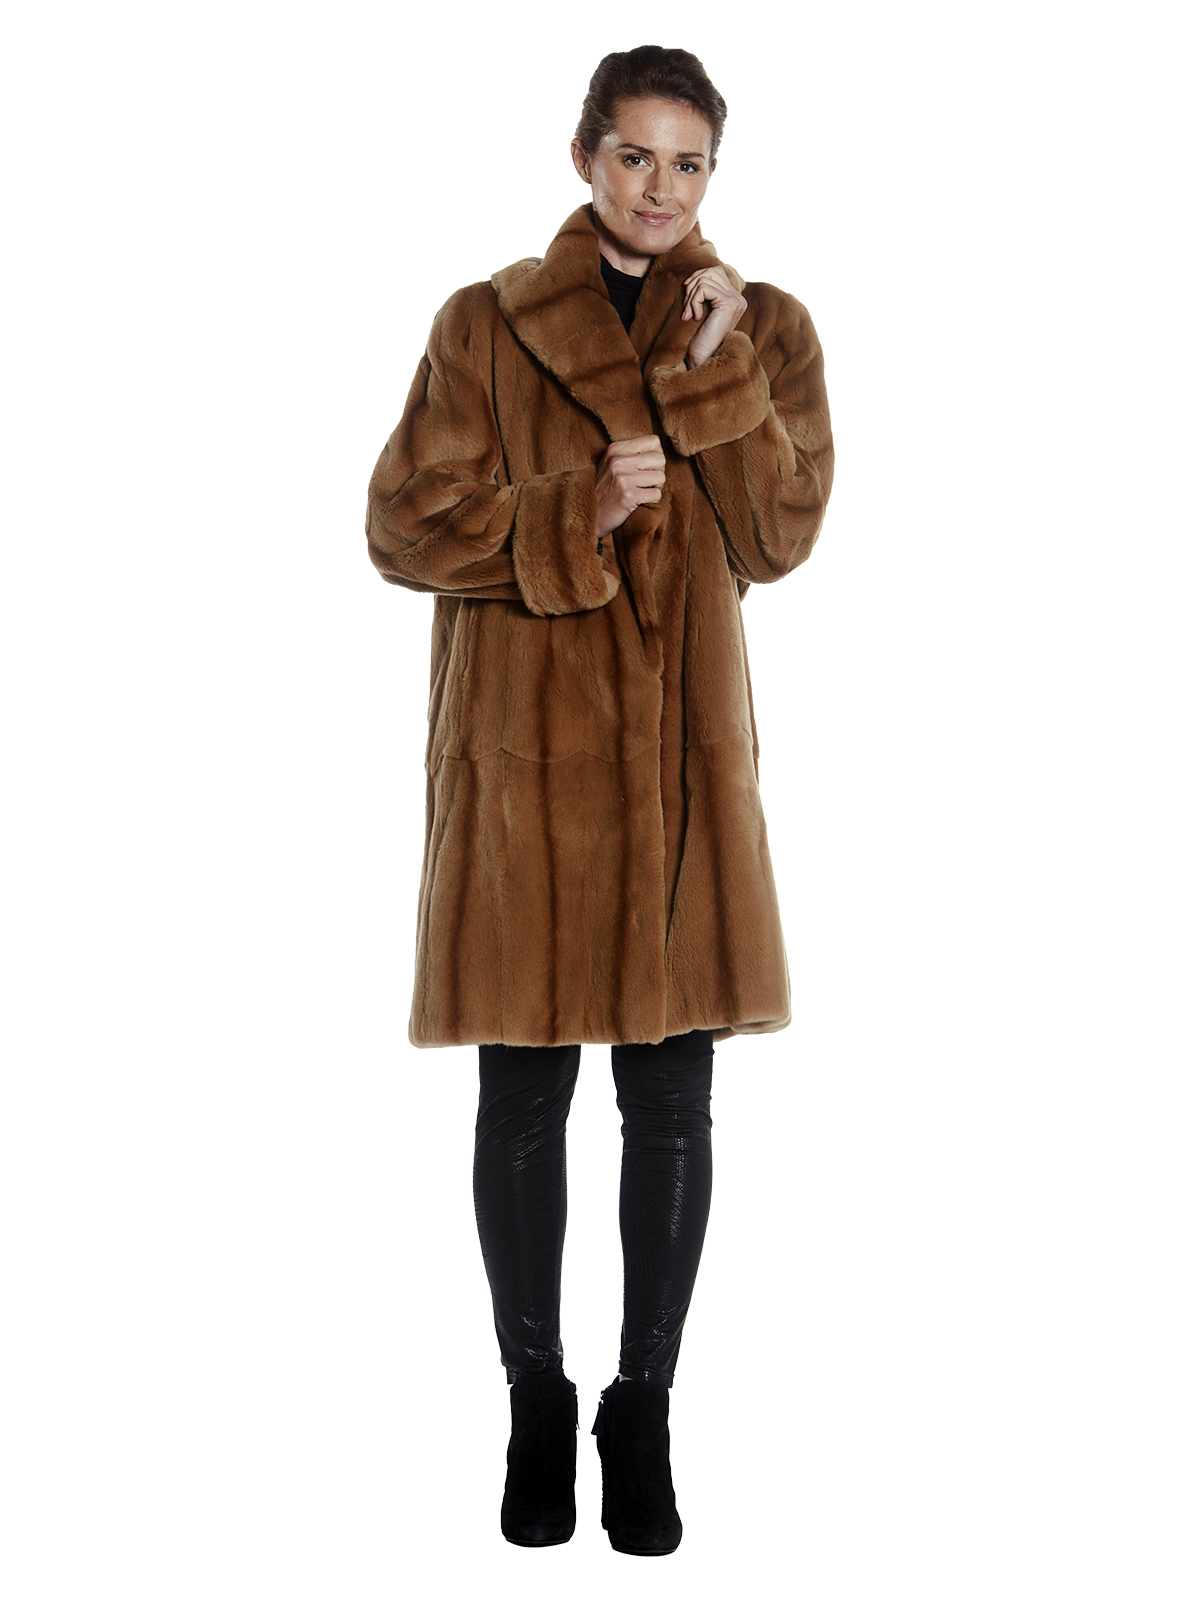 Designer Ferret Fur Coat Mens And Womens Autumn Leather Shearling Coat For  Comfortable And Warm Windbreaker In Sizes S 4XL From Fen258369, $53.73